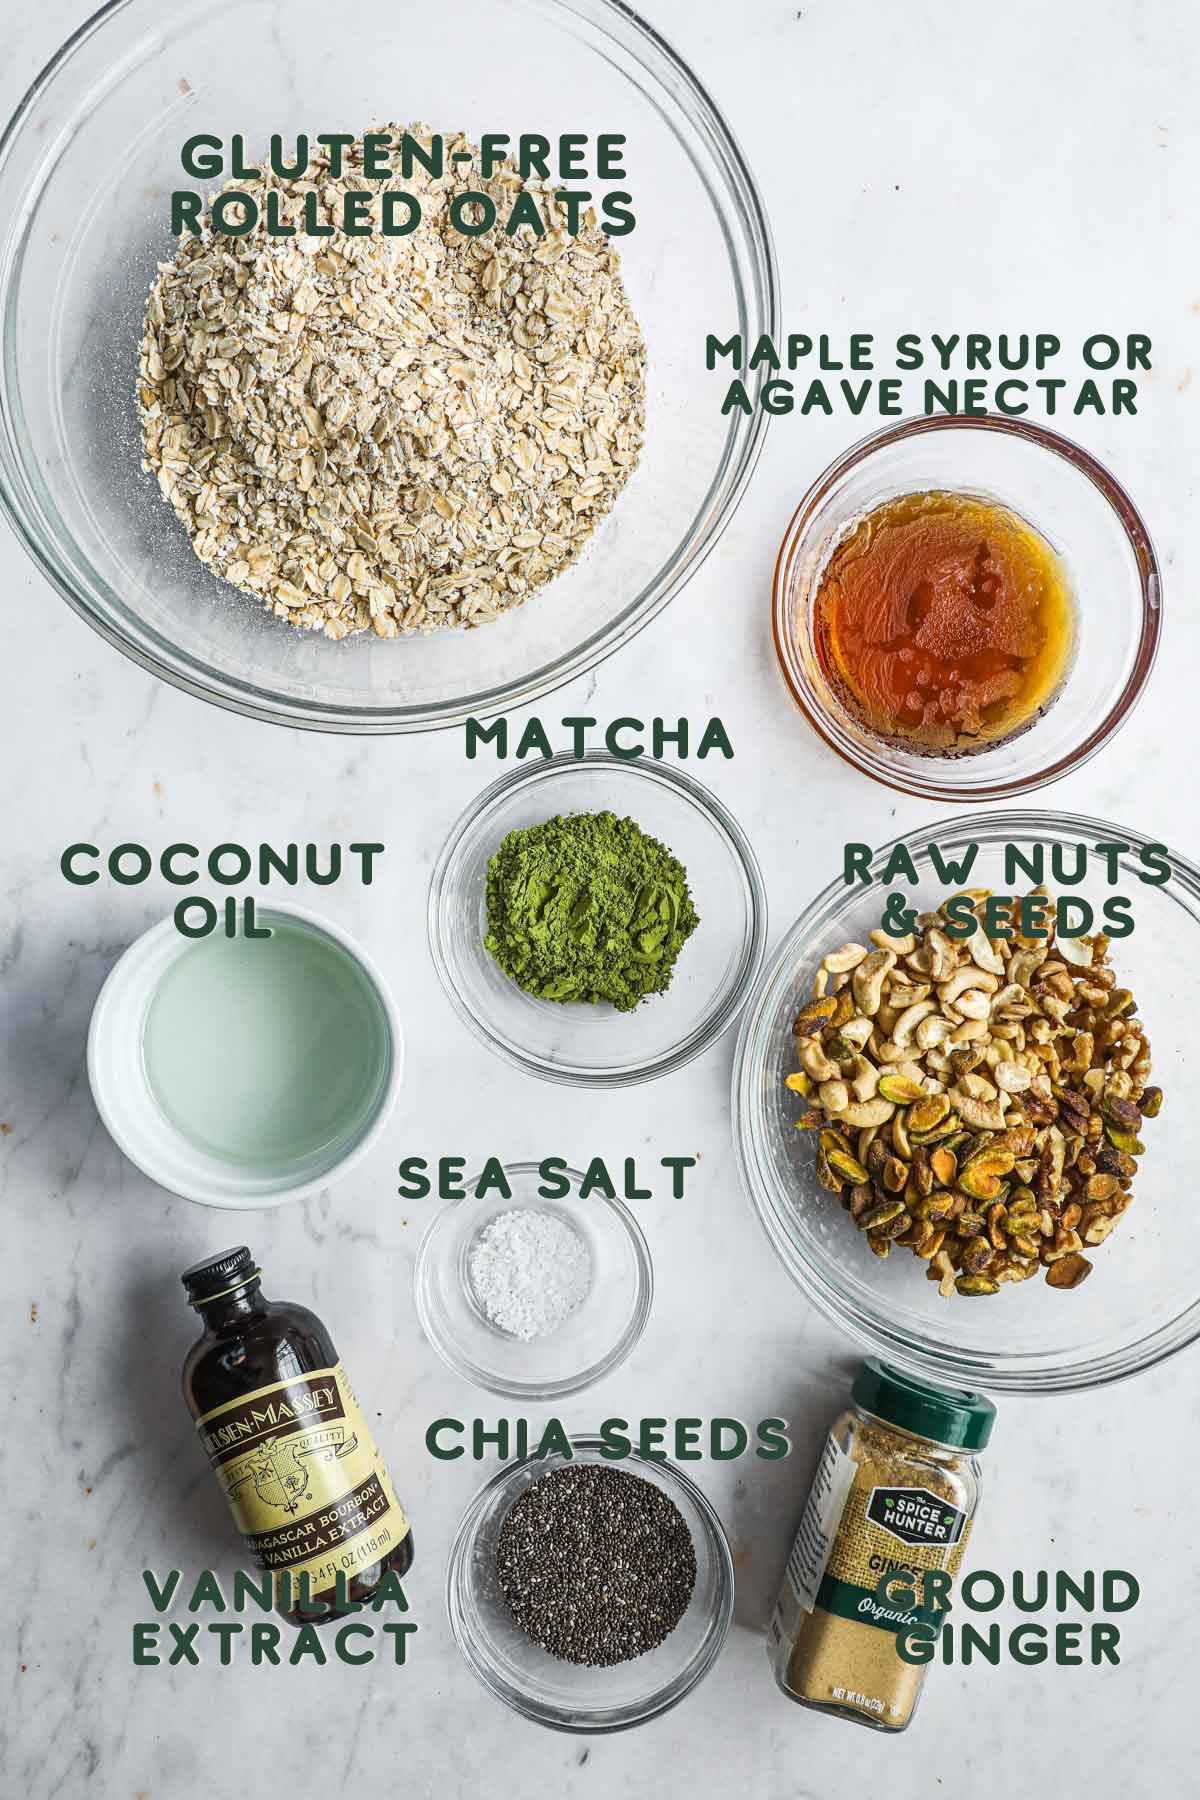 Ingredients to make gluten-free matcha granola, including rolled oats, maple syrup, seeds and nuts, coconut oil, vanilla extract, chia seeds, ground ginger, and matcha powder.